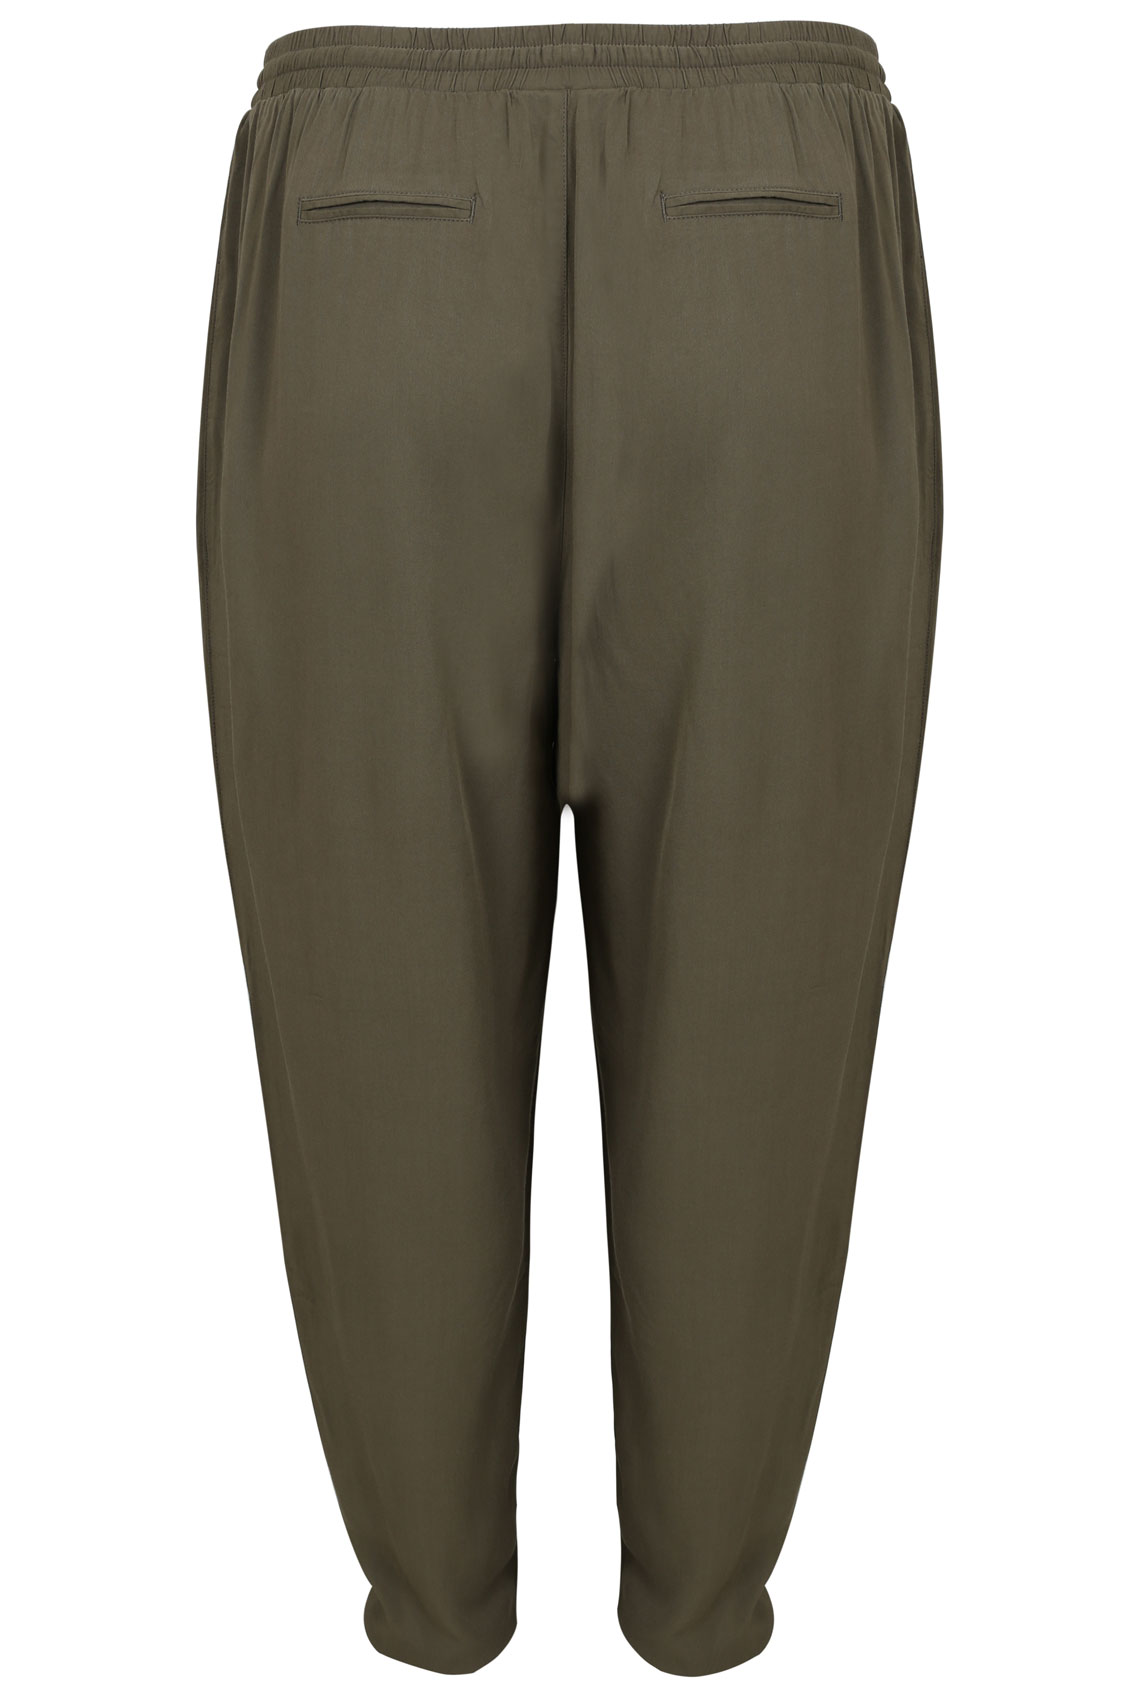 Khaki Harem Trousers With Side Pockets Plus Size 14 to 32